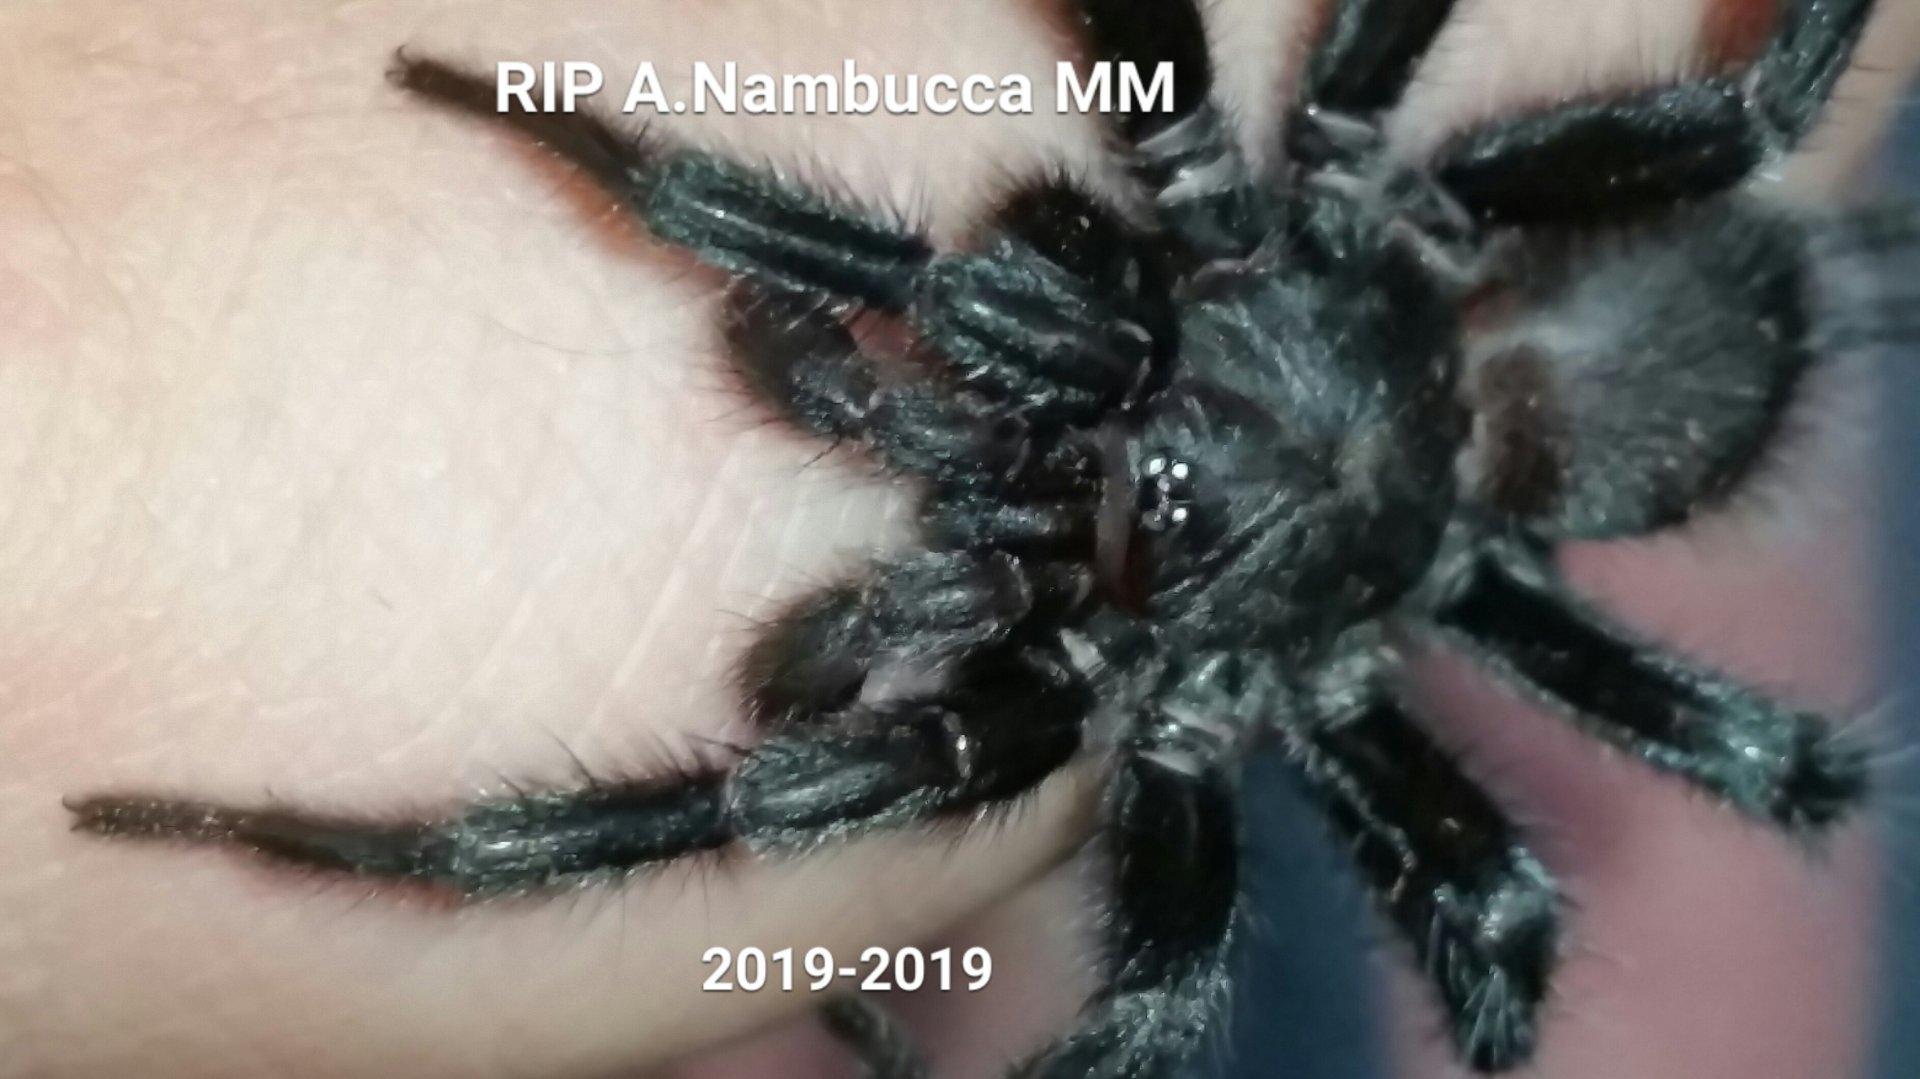 Re-uploaded tribute to my Australothele Nambucca male